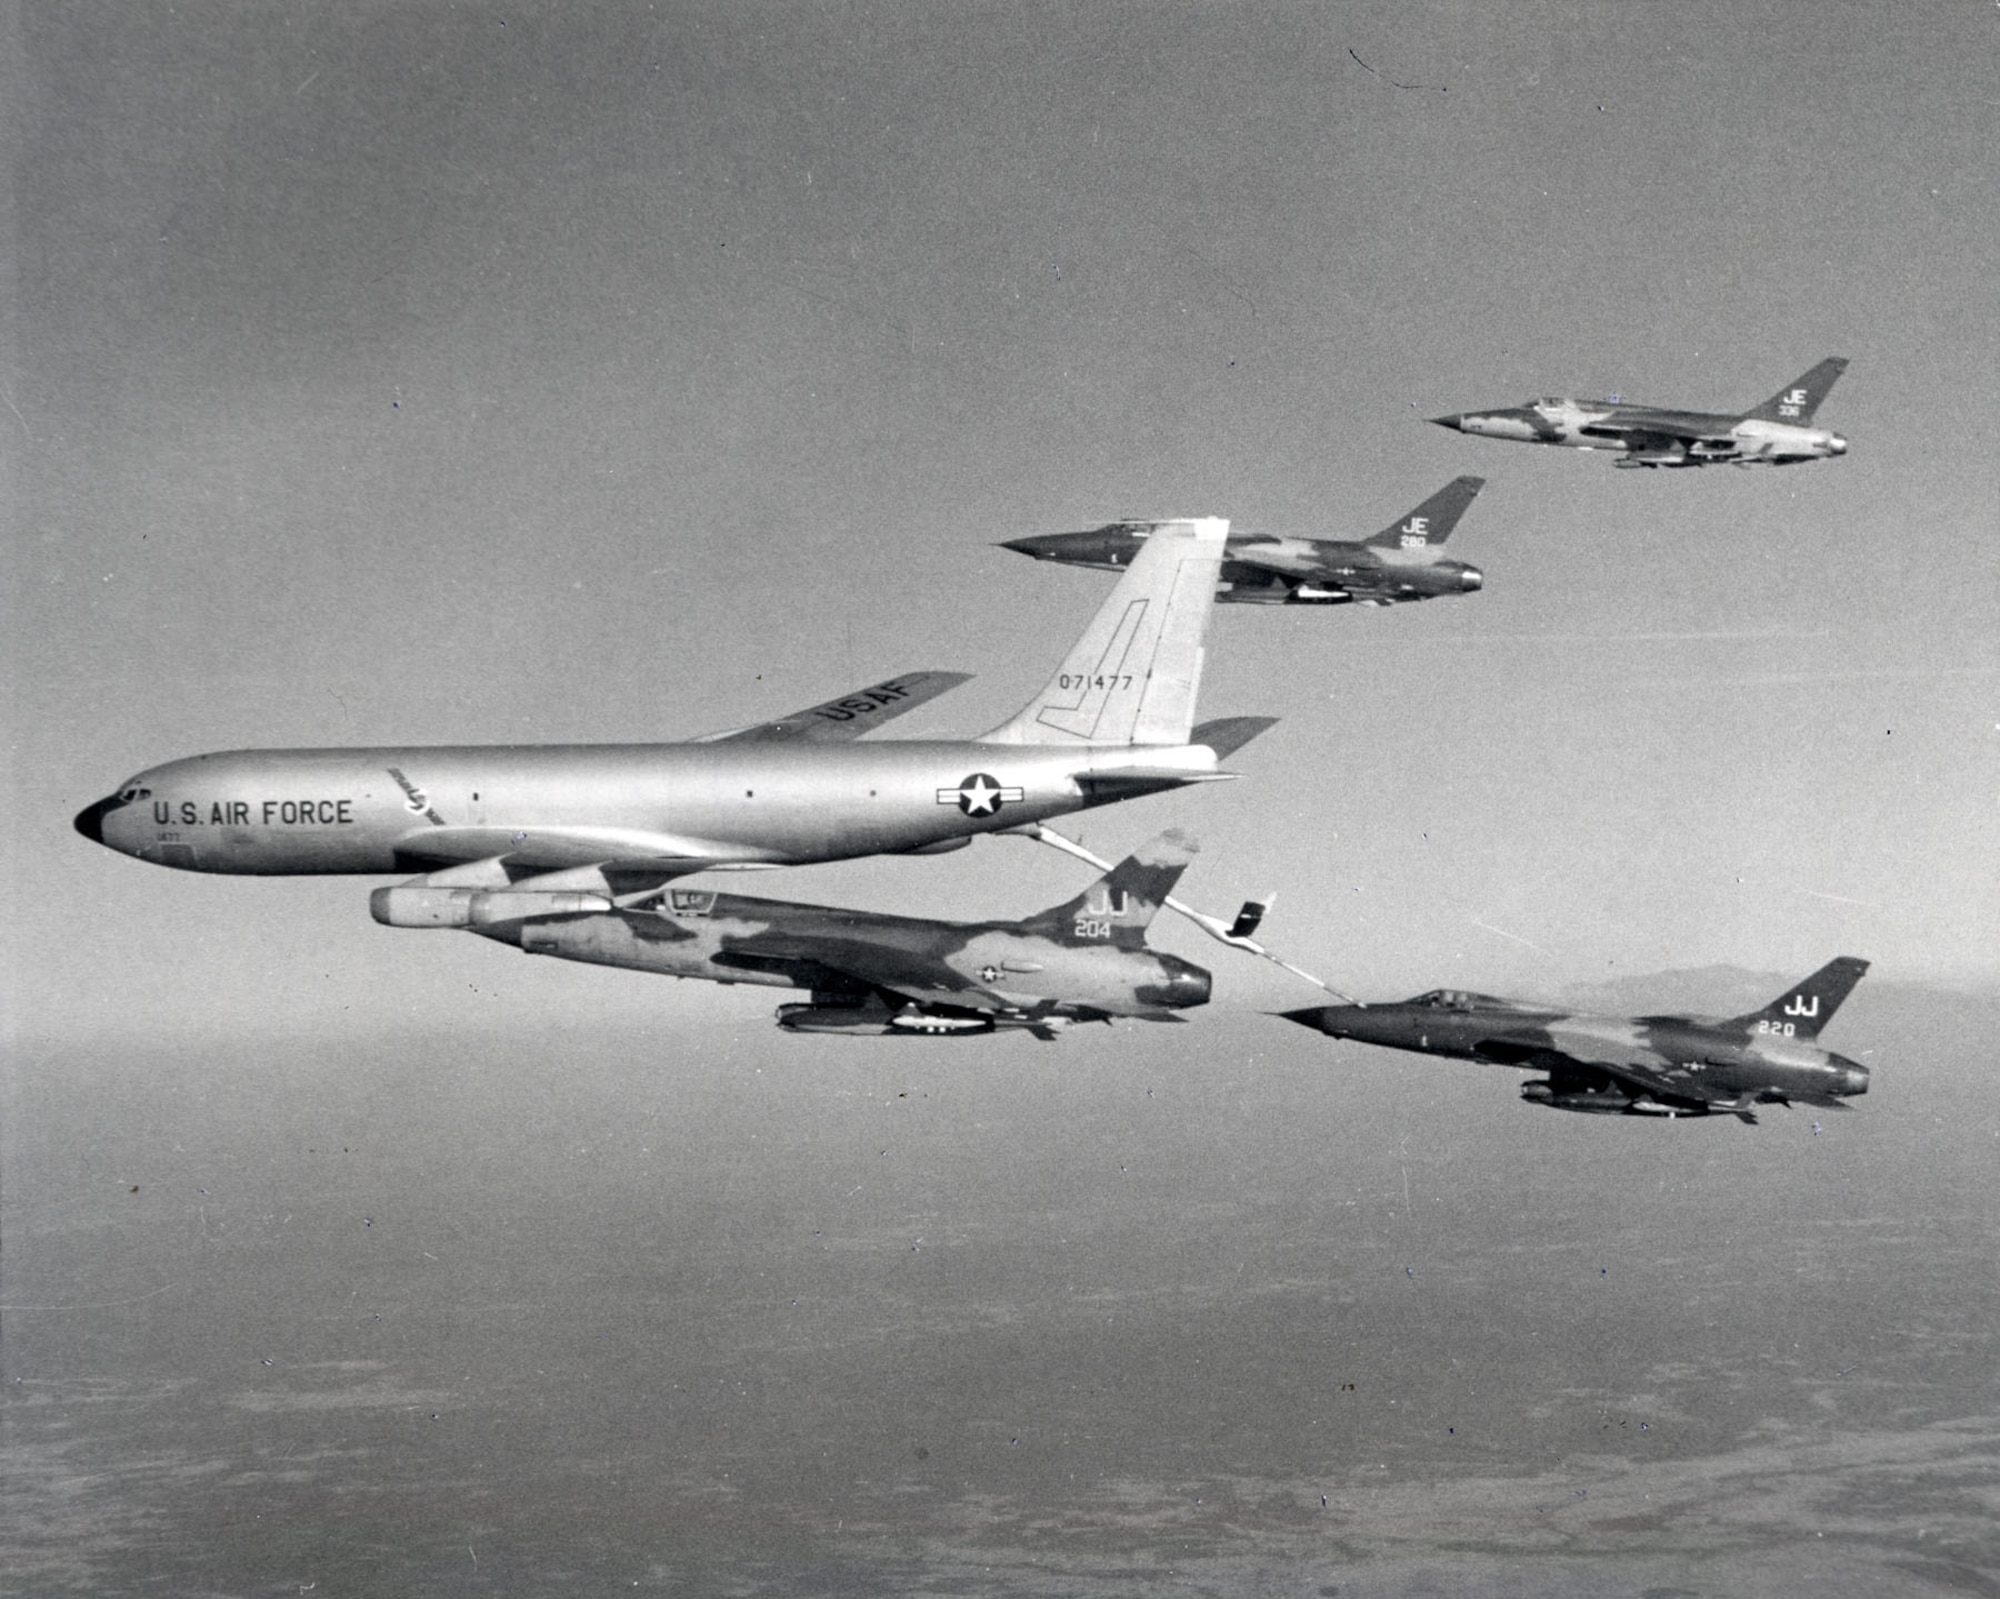 Tankers were essential in allowing heavy fighter-bombers to reach North Vietnamese targets and return. Tinker Air Force Base's role began almost immediately after the contract for the purchase of 29 aircraft in 1954. The KC-135’s first flight took place Aug. 31, 1956, from Boeing’s Payne Field in Washington state. (U.S. Air Force photo)